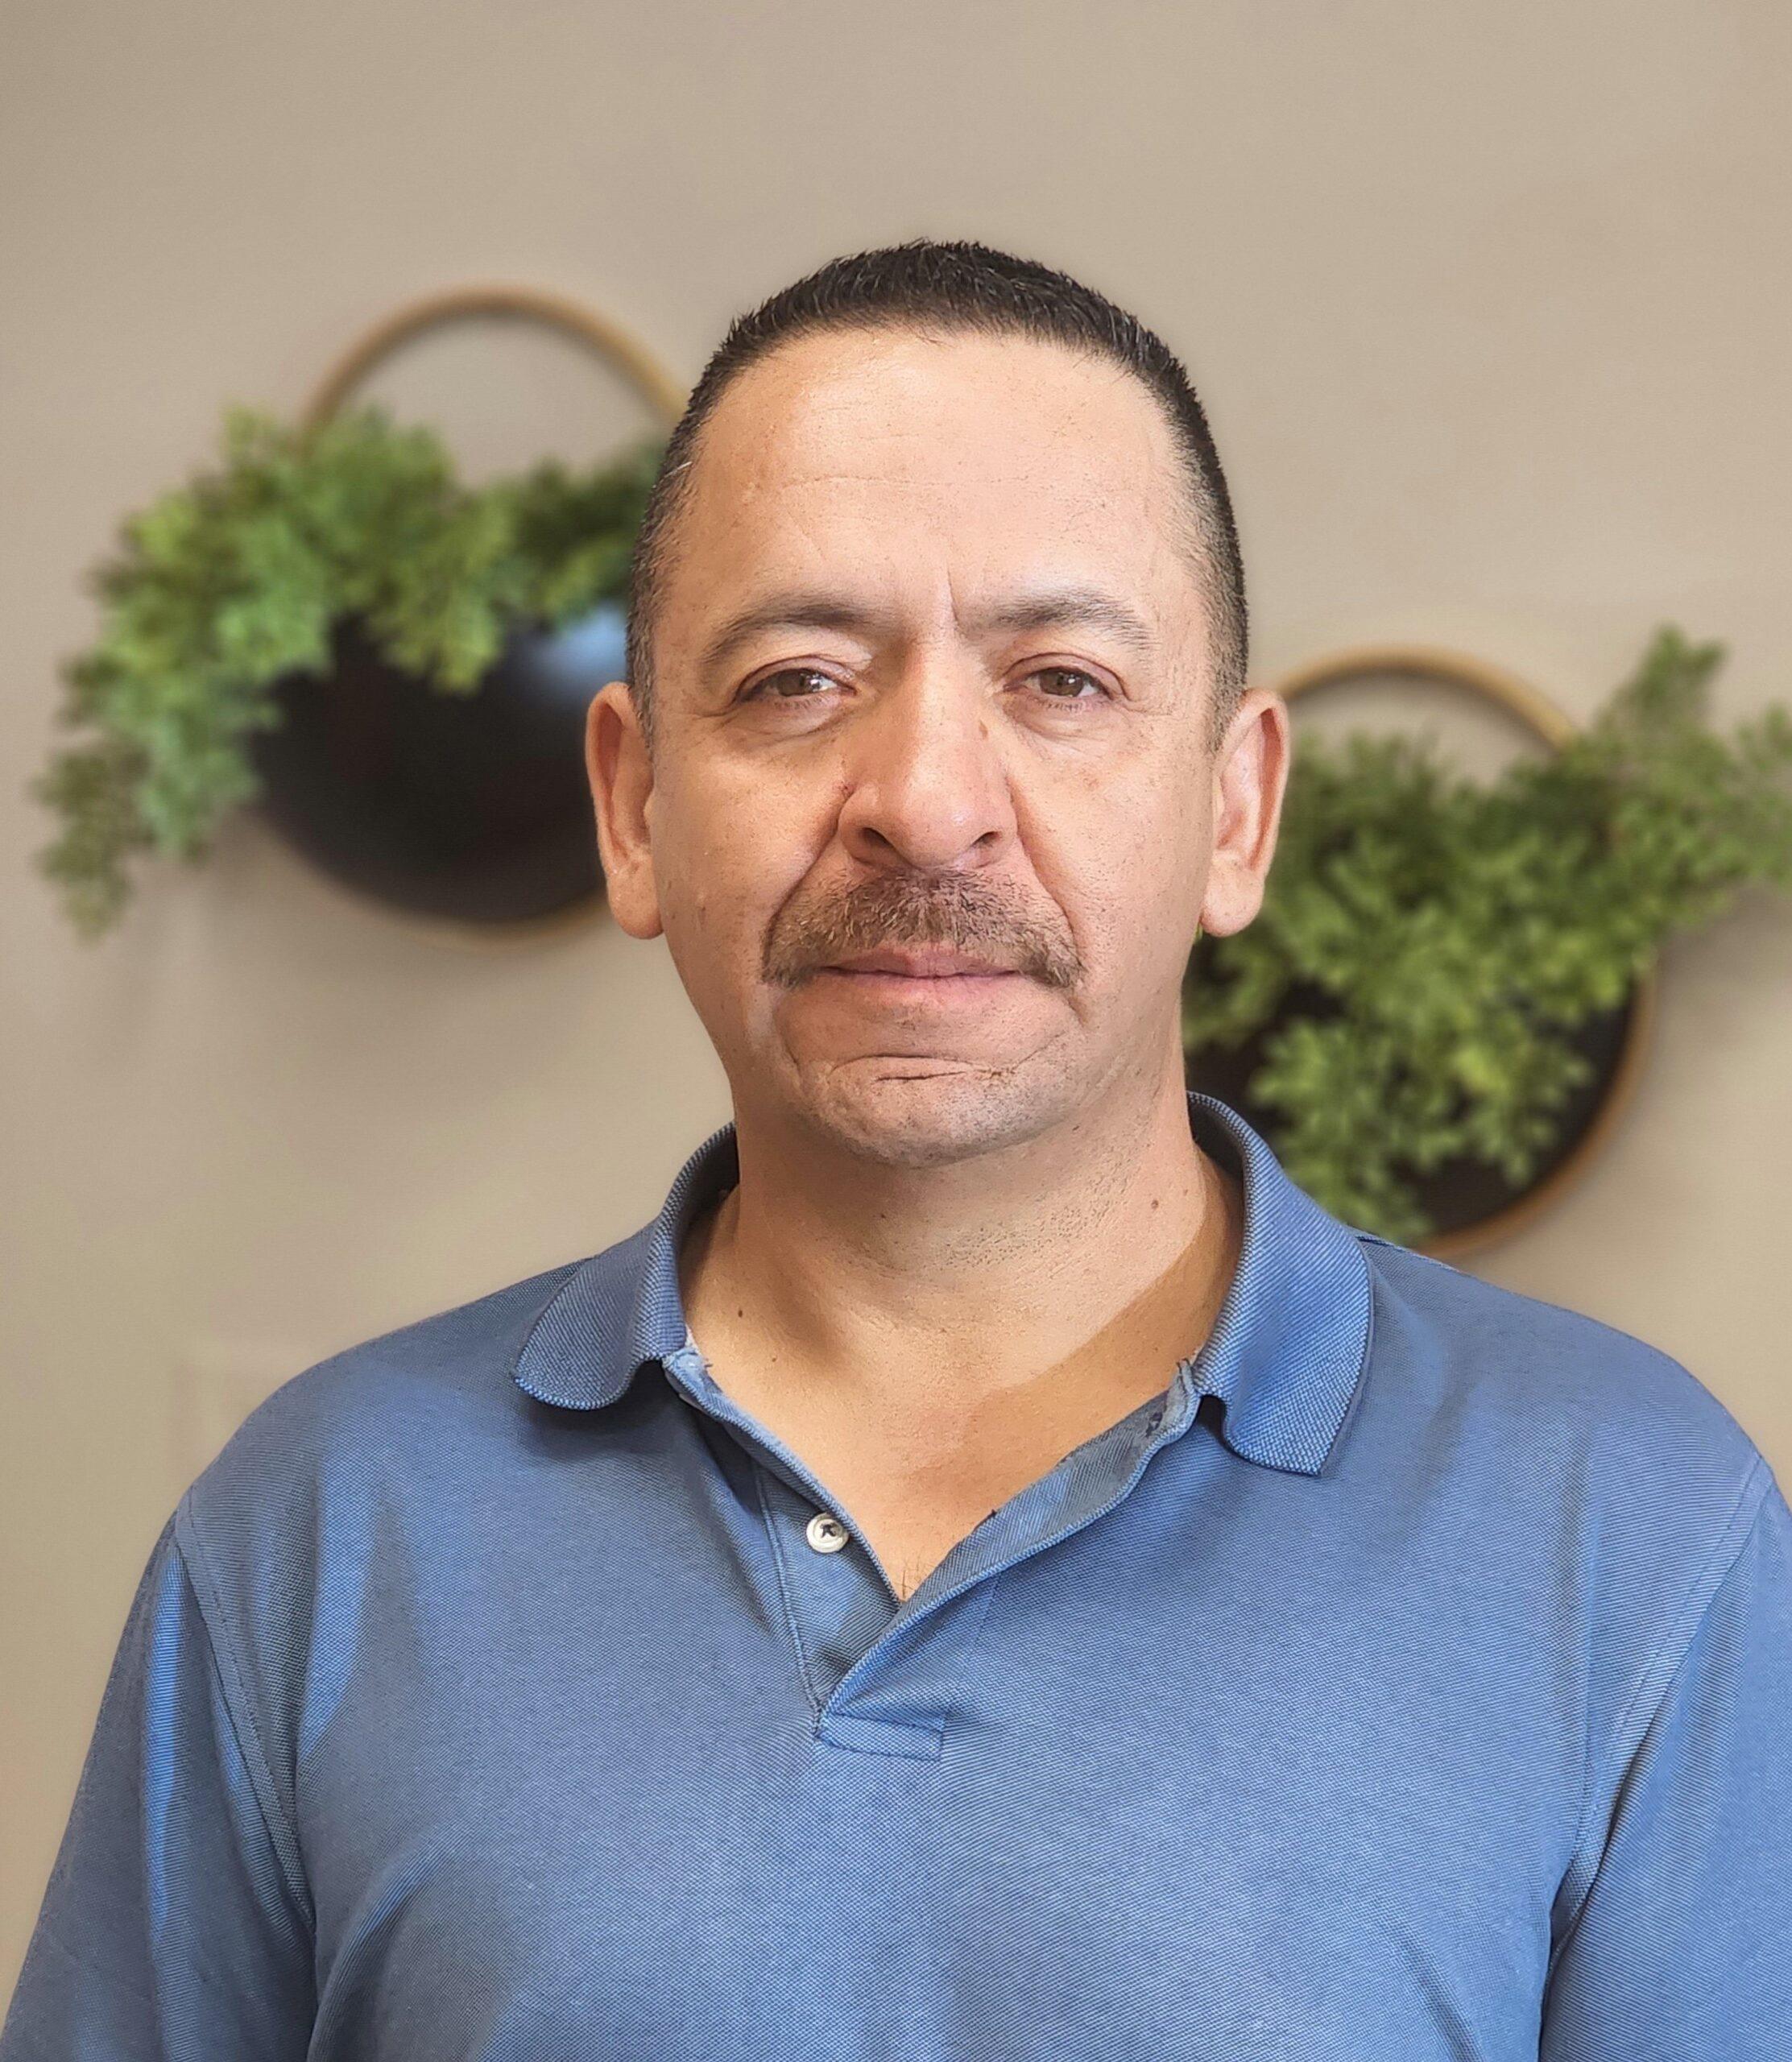 Head shot Image of Jorge Torres. He has a buzzcut hair style. He's got a shaven mustache and wearing a blue collard shirt. There background is a beige wall with two plants hanging on the wall. 